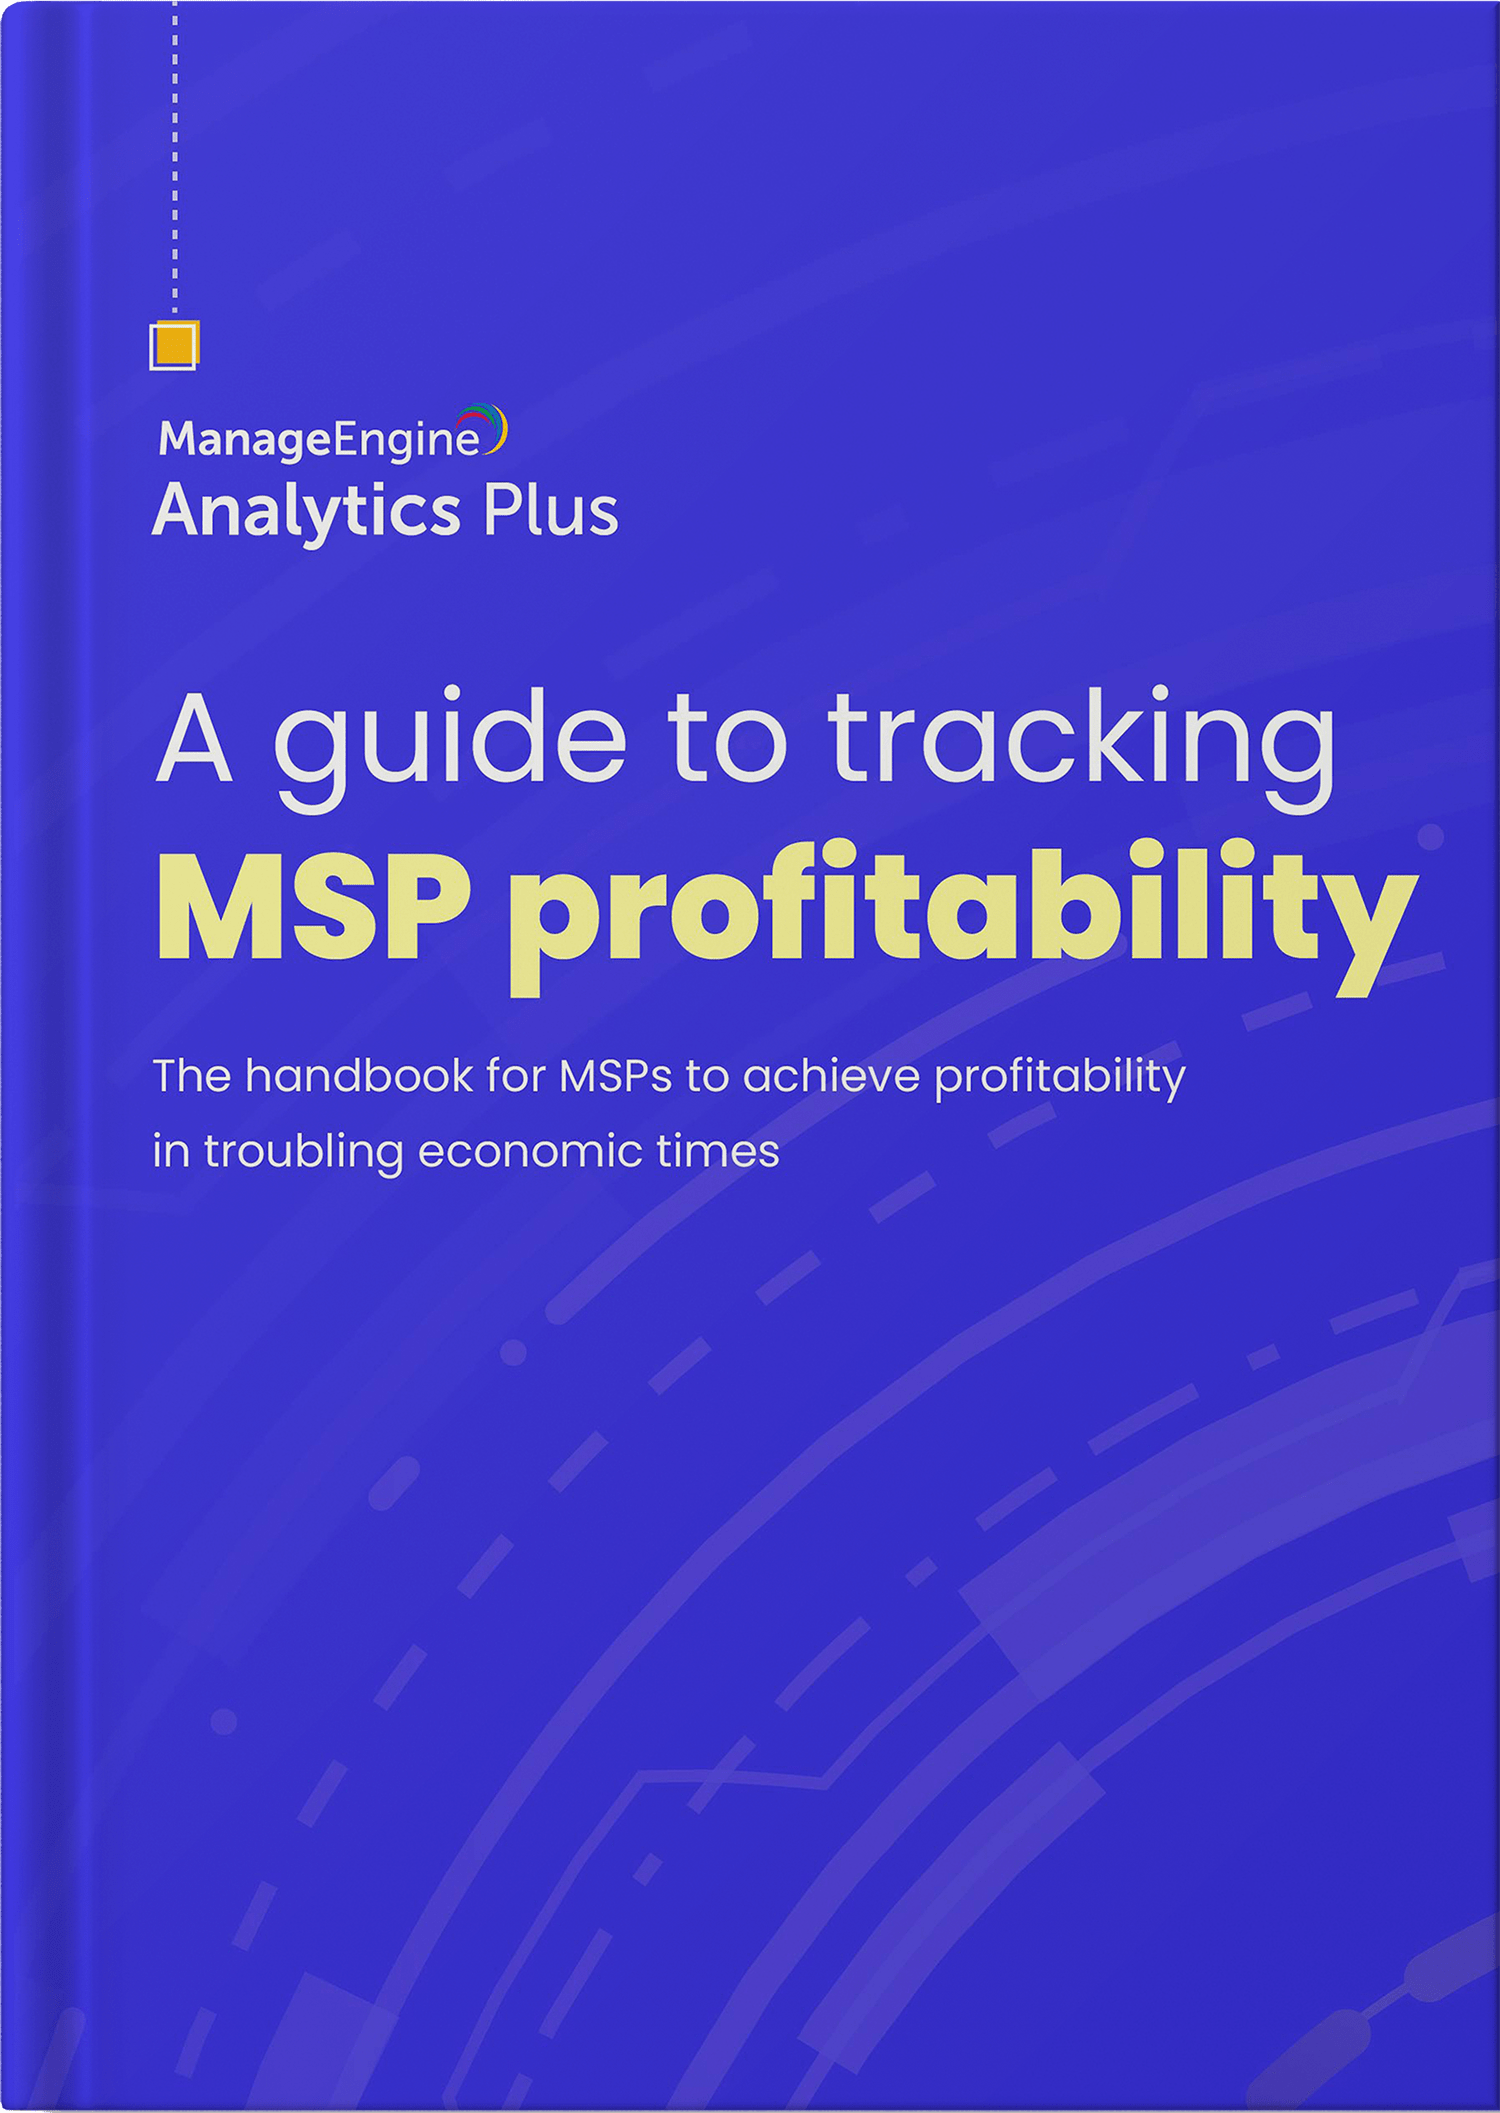 THow MSPs can increase profitability using analytics